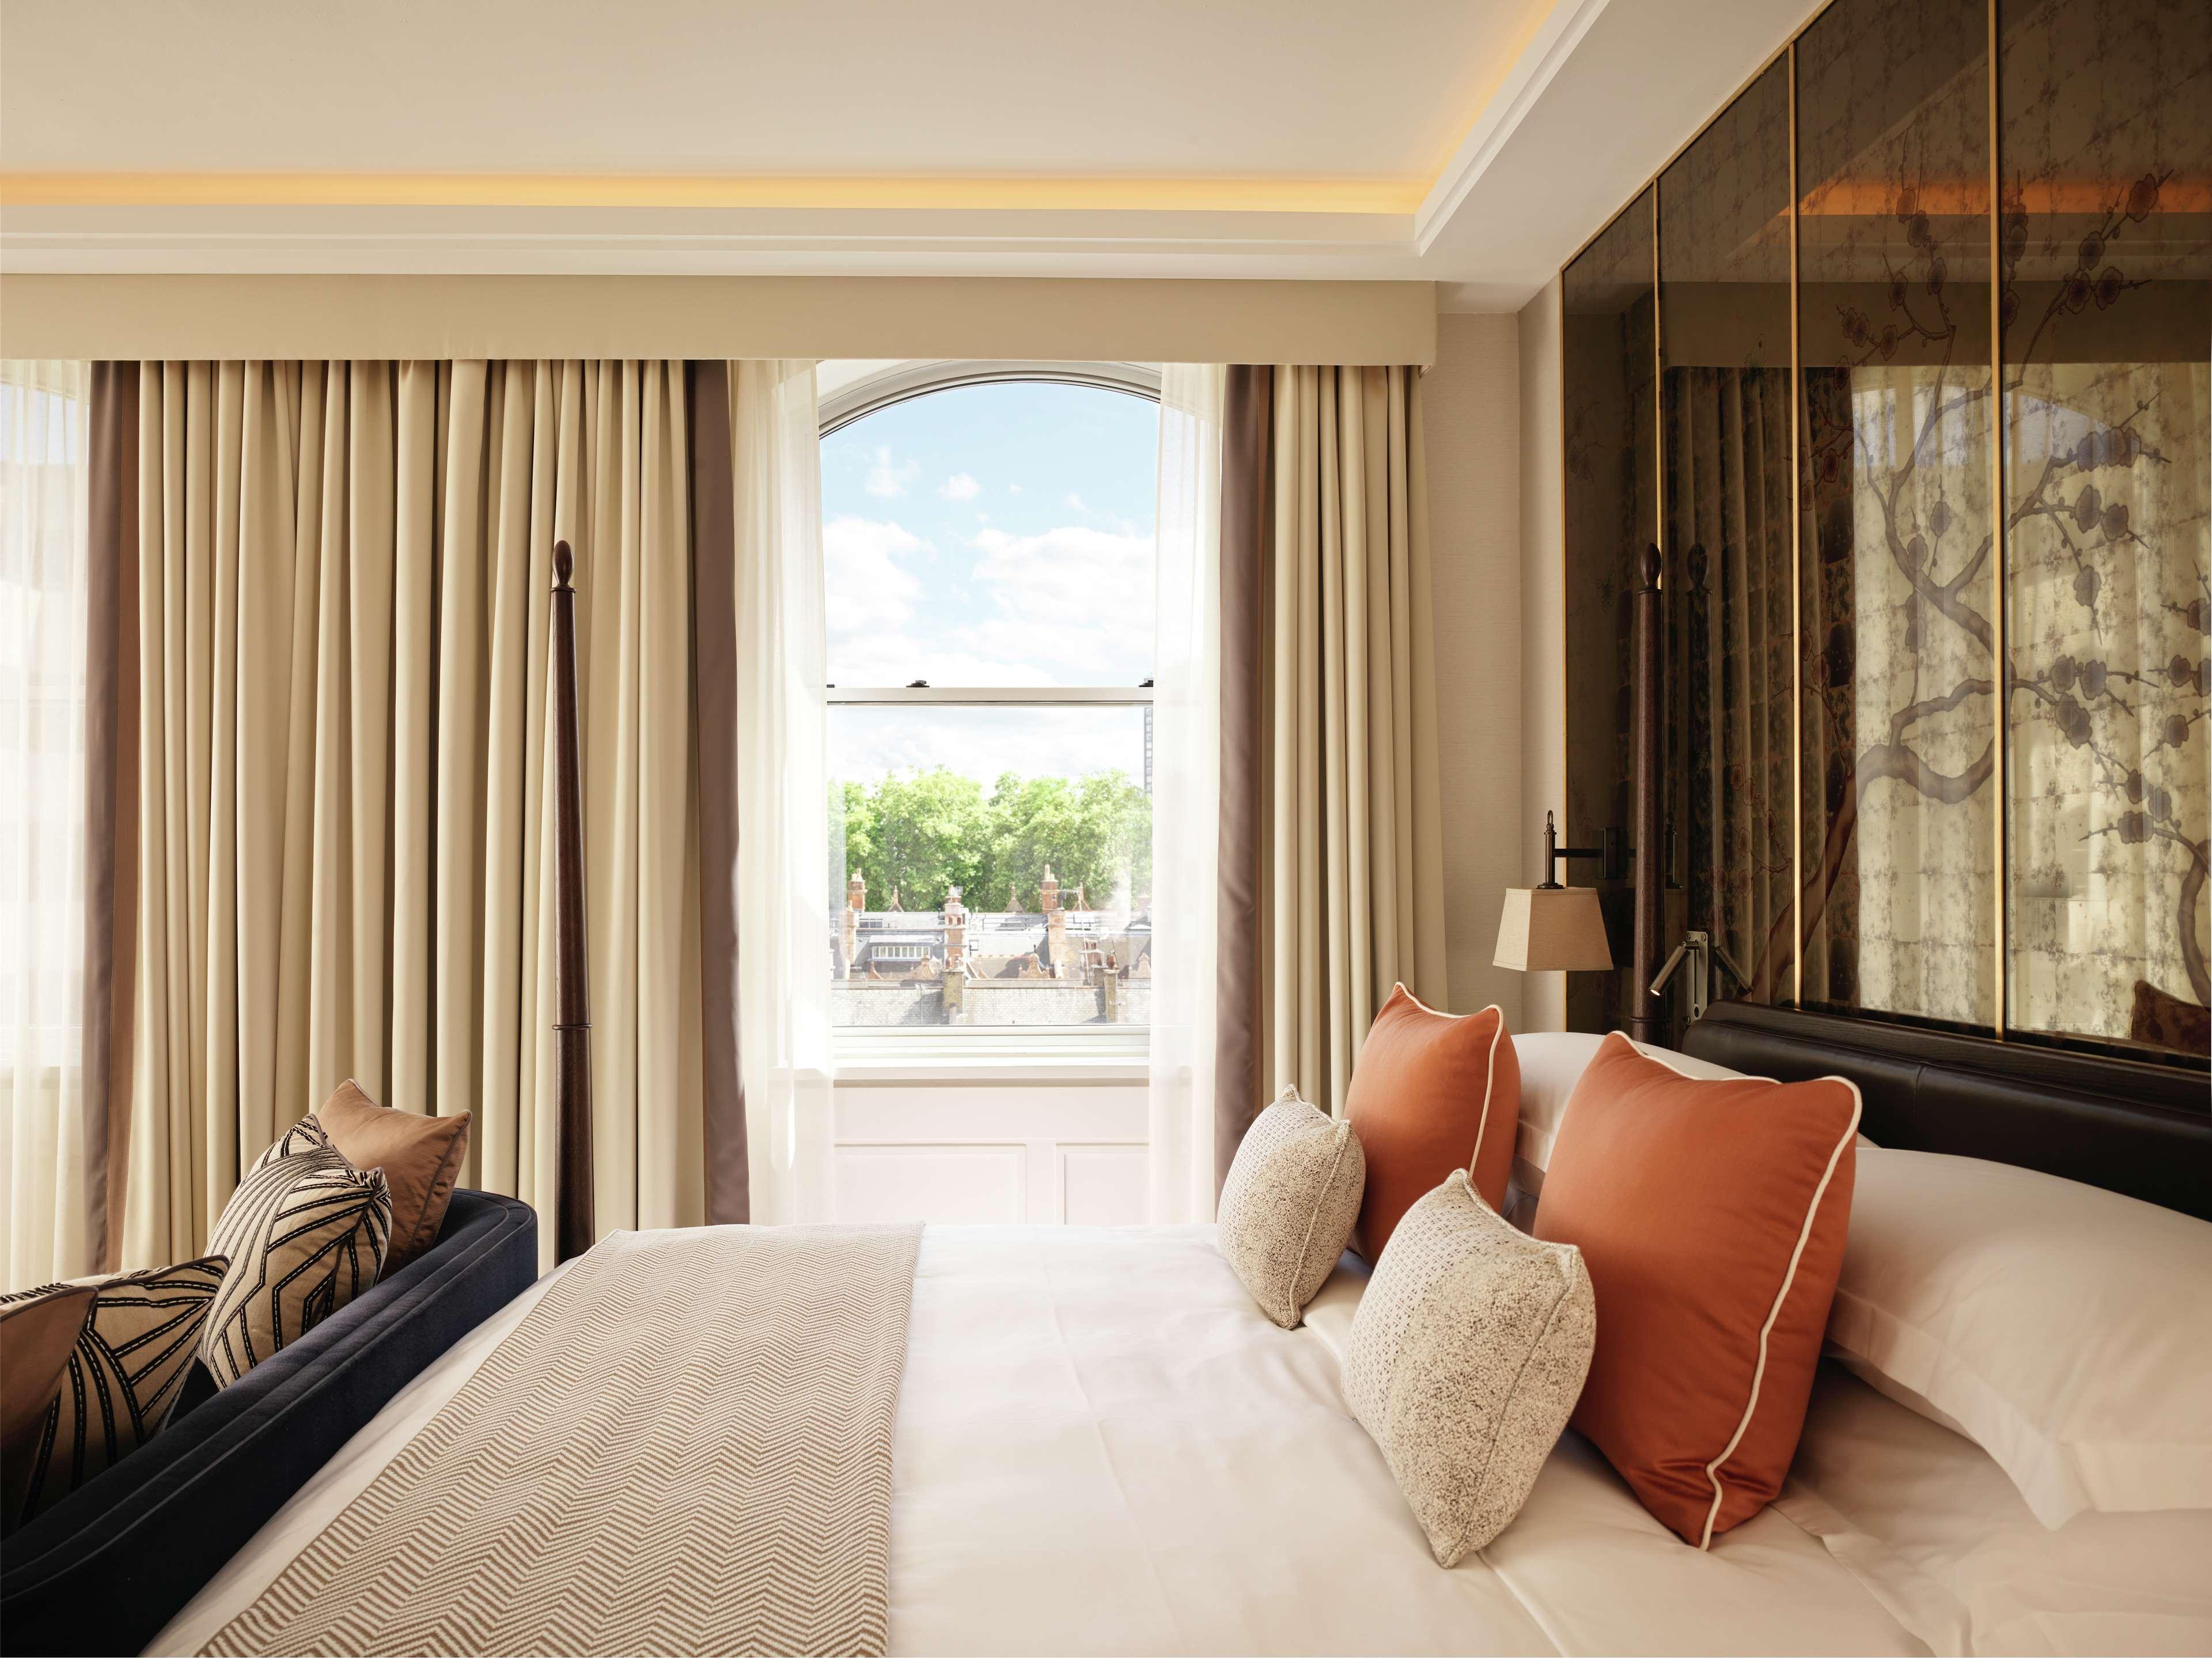 The Biltmore Mayfair, LXR Hotels & Resorts from $131. London Hotel